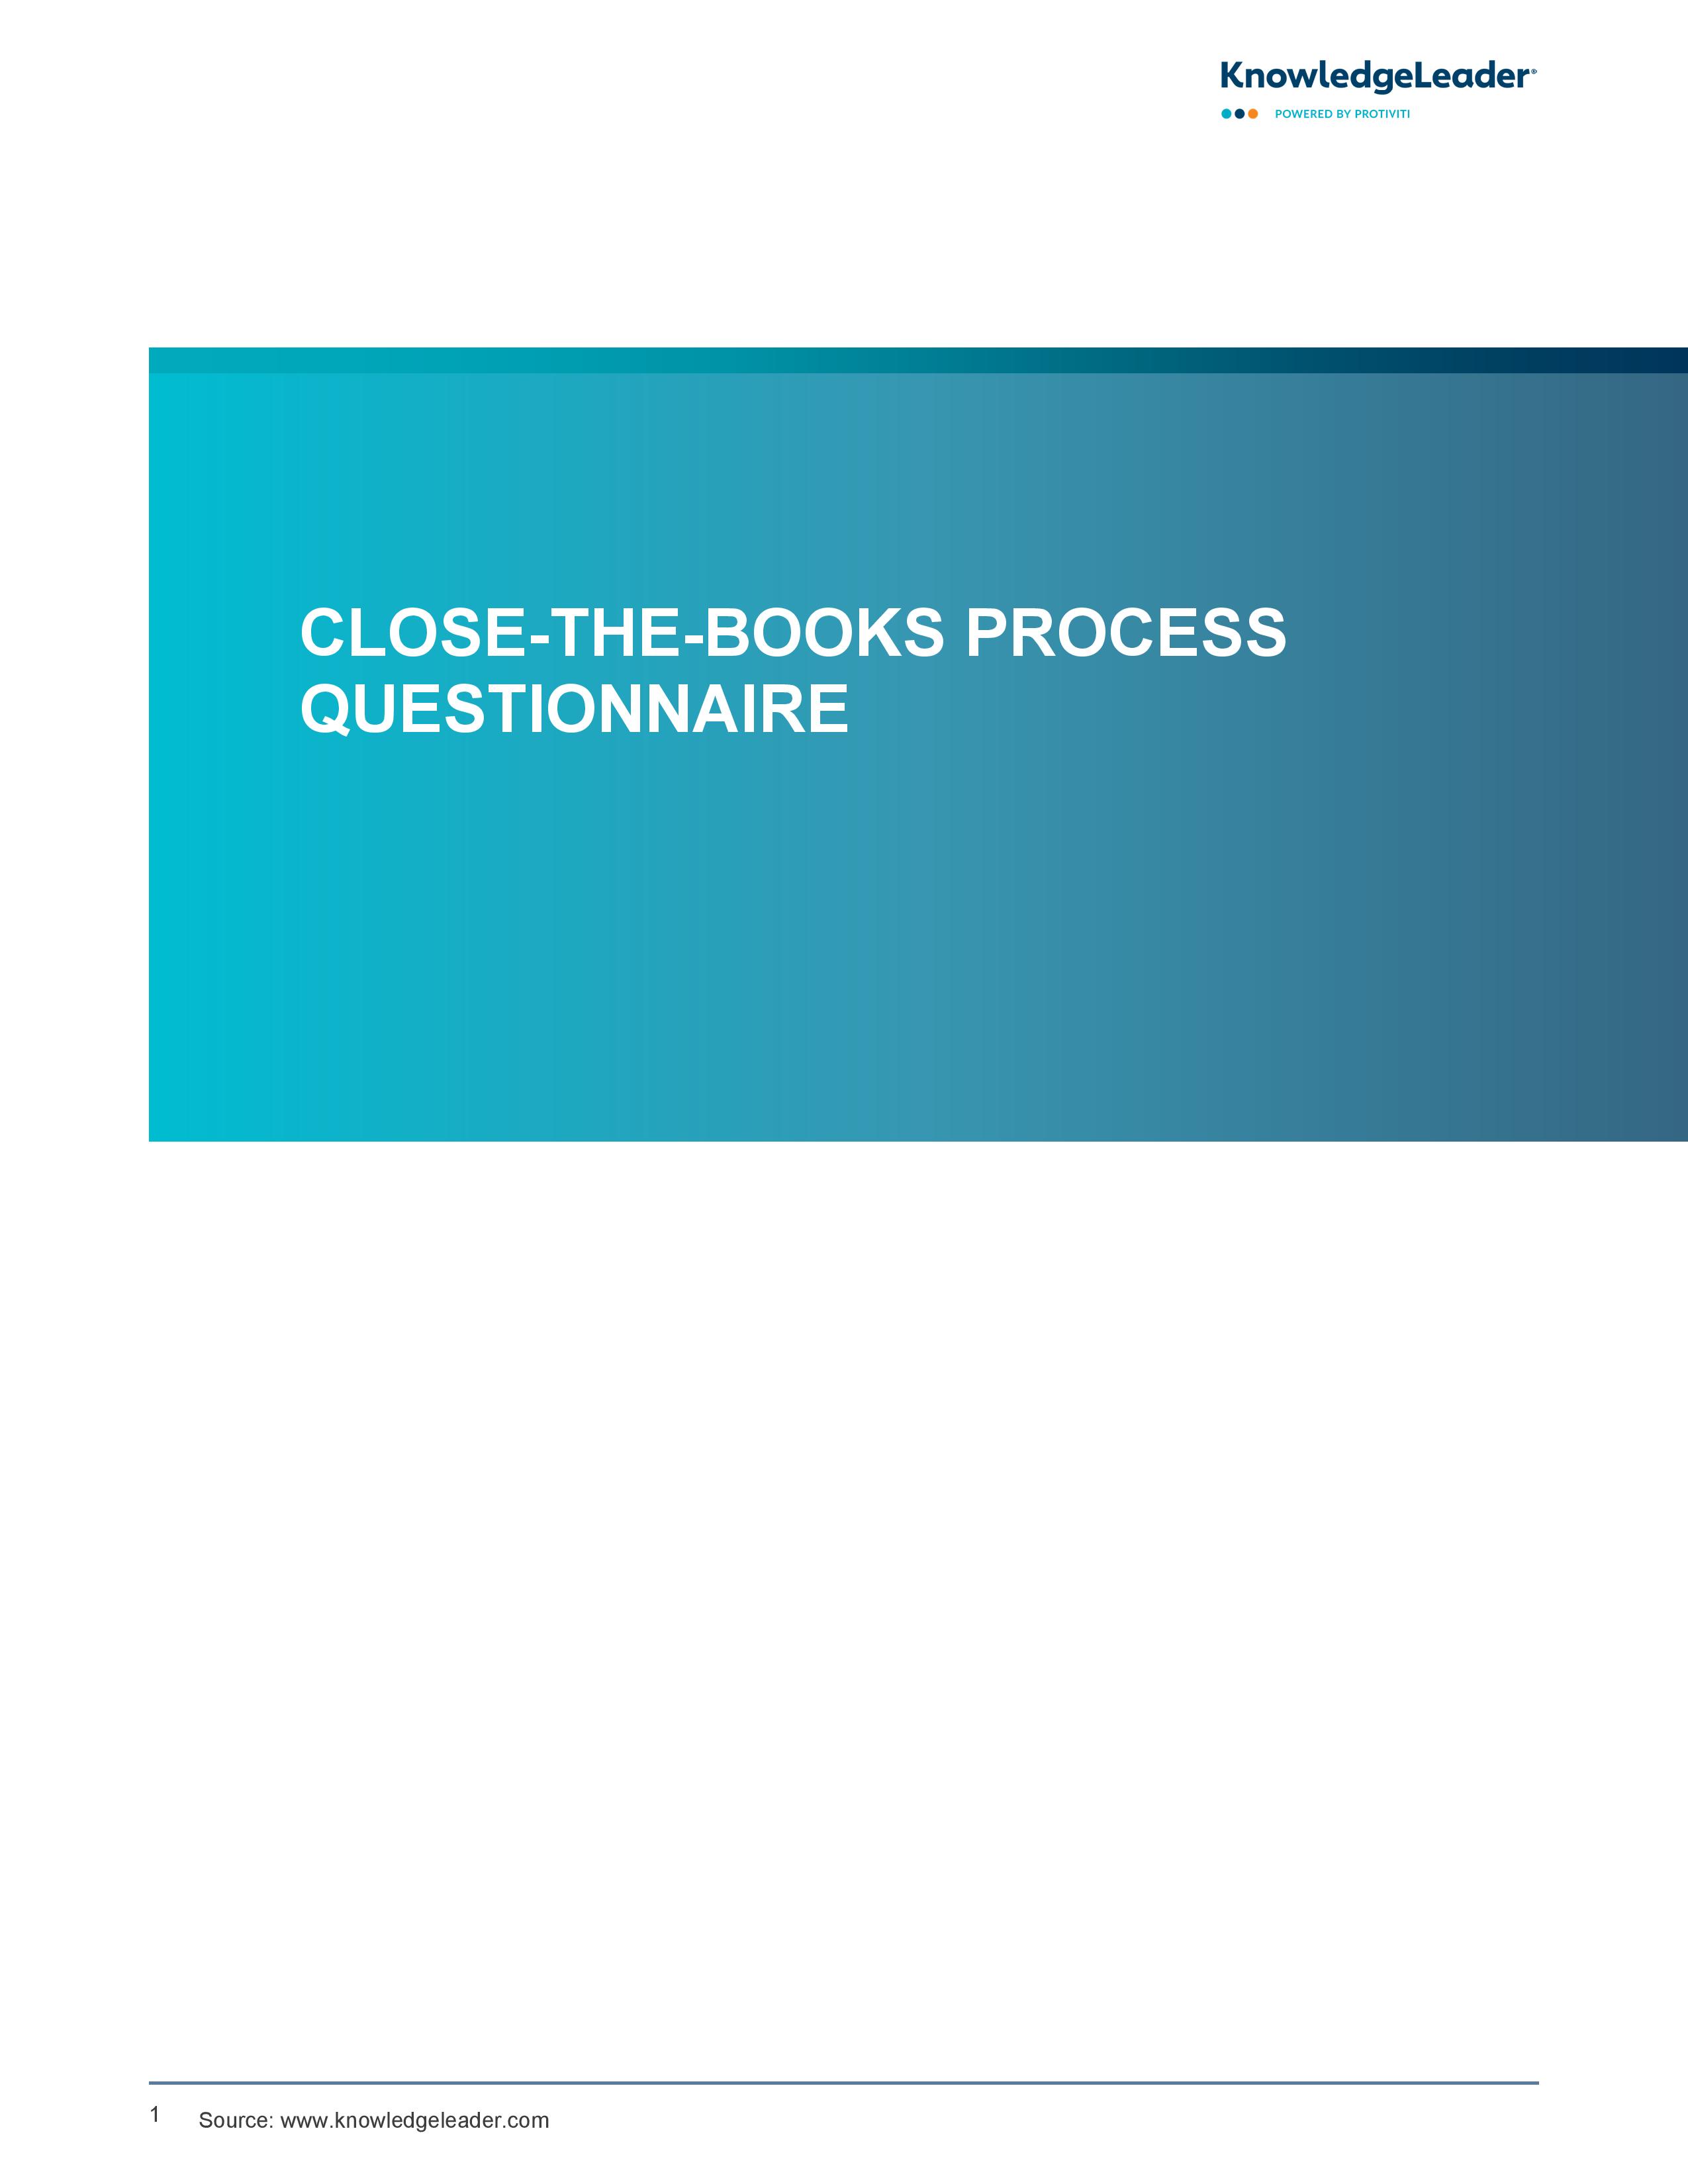 screenshot of the first page of Close-the-Books Process Questionnaire